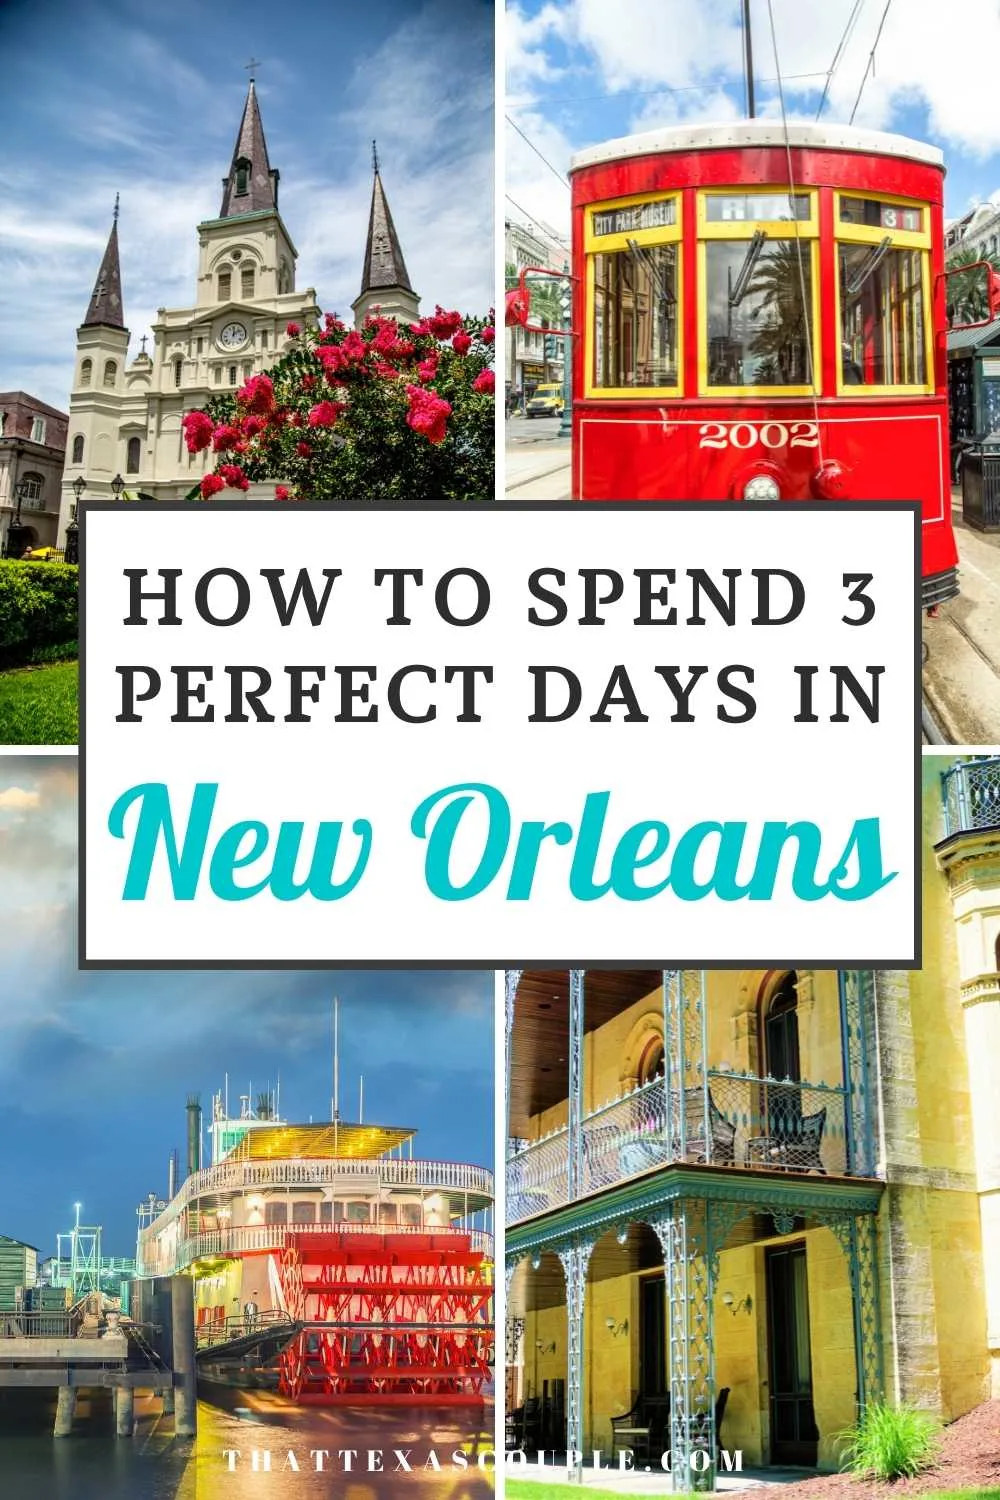 3 Days in New Orleans Pin Image